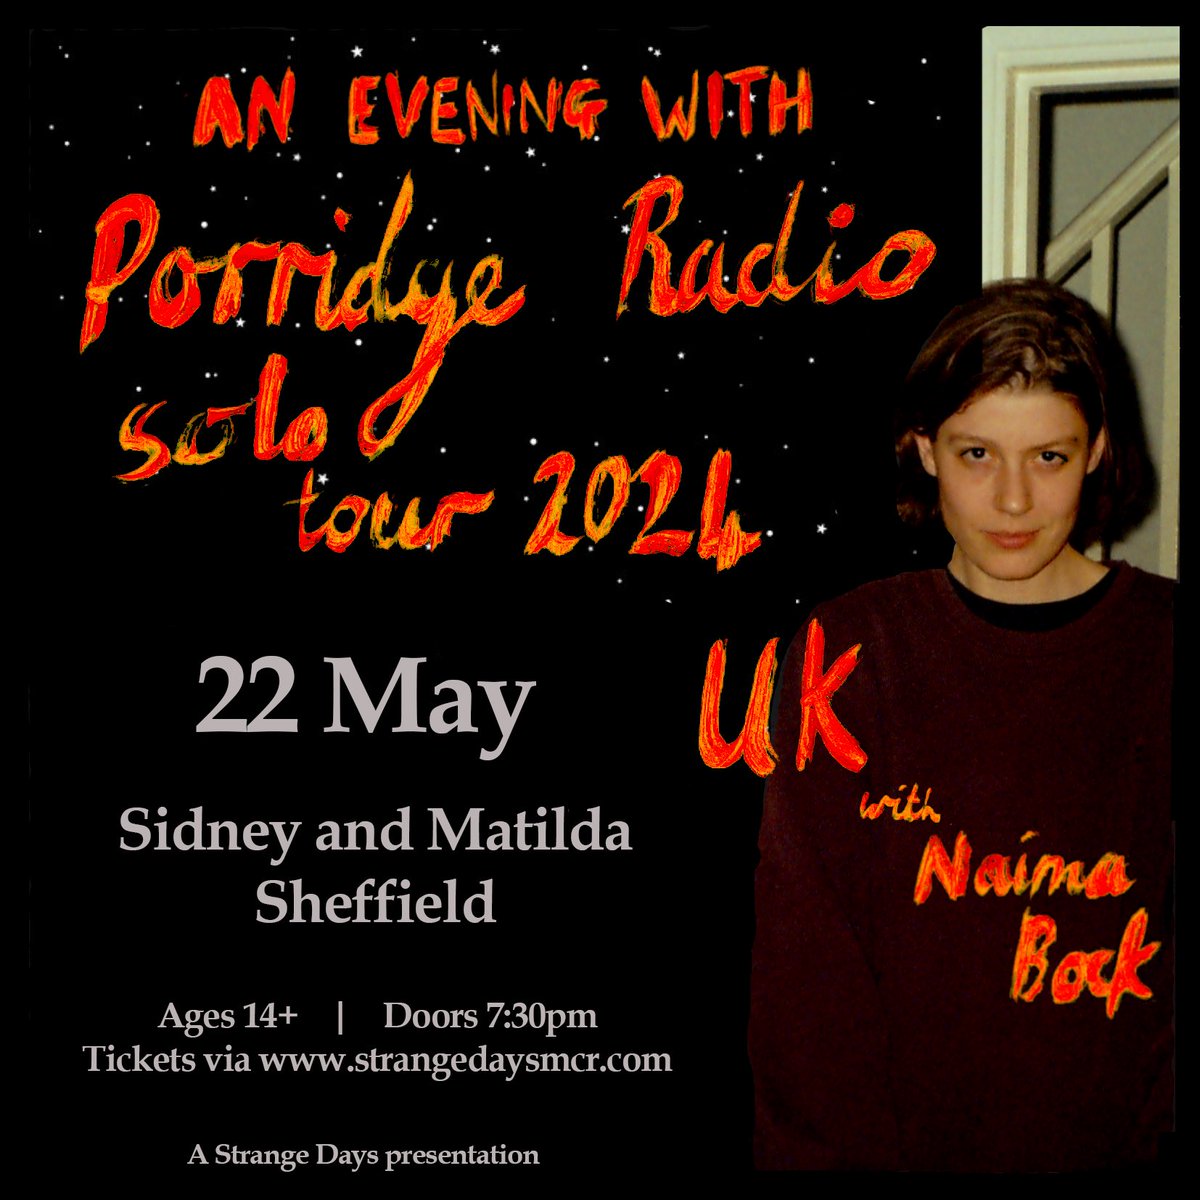 Less than a month to go until we welcome @porridgeradio’s Dana Margolin to Sheffield for a very special solo show at @sidneymatilda with support from the wonderful @naimabock Tickets via link.dice.fm/Q7d9bdbf17e3